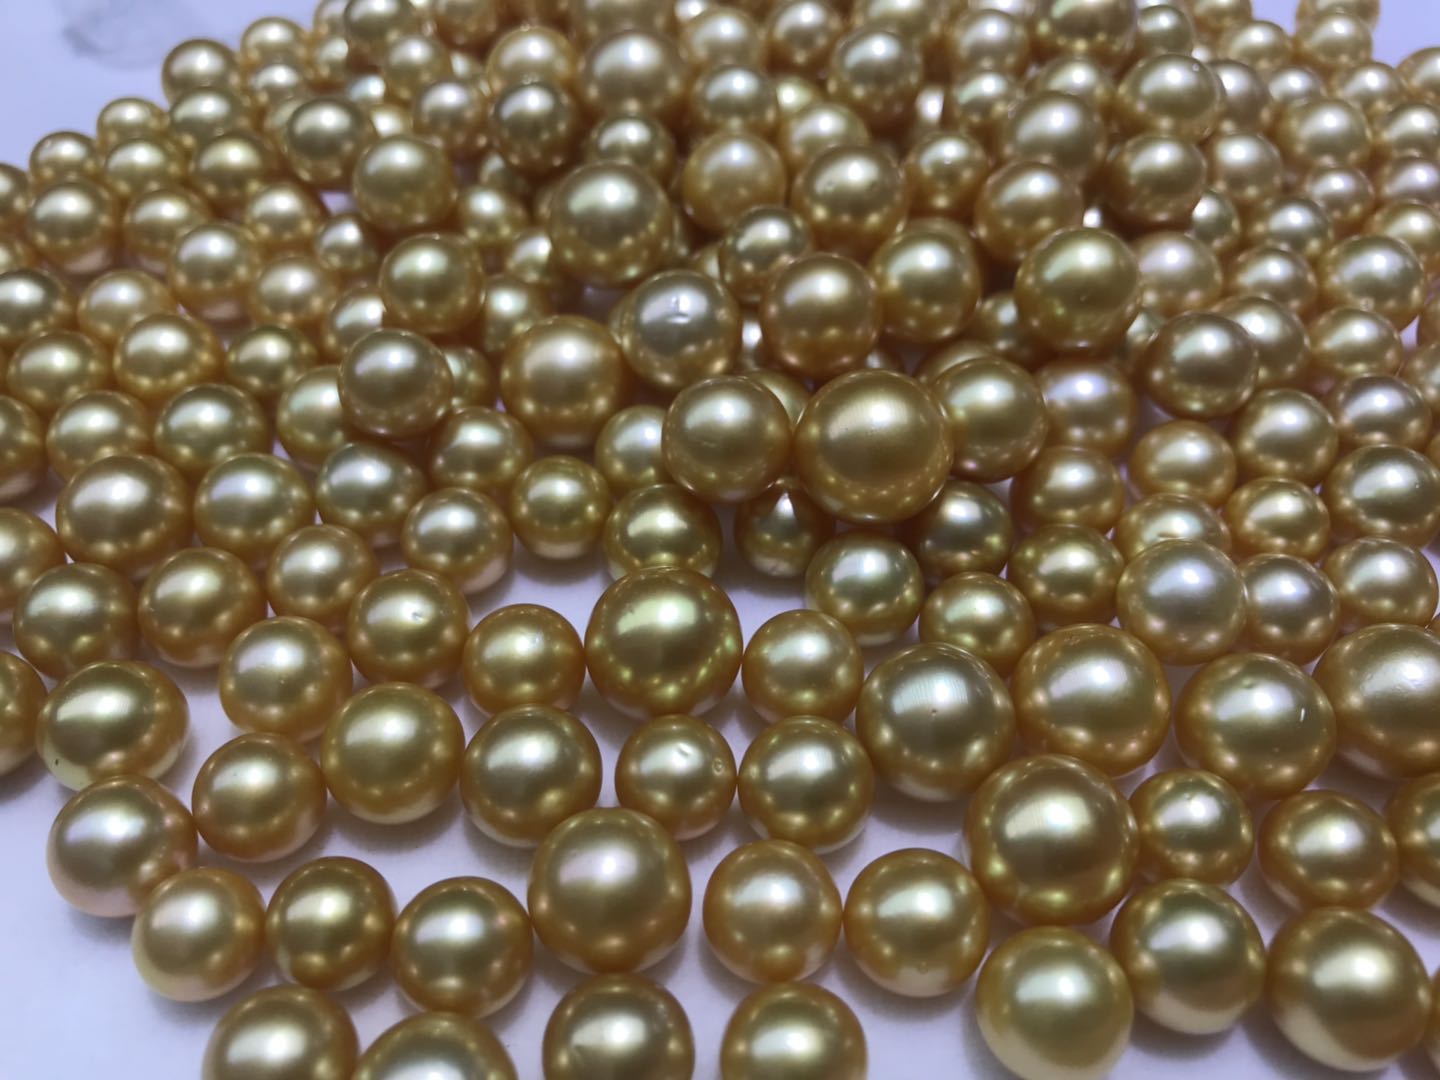 South sea golden pearls wholesales price,10-15 mm high quality AAAA perfect round nature loose south sea dark gold pearl with half or no hole.